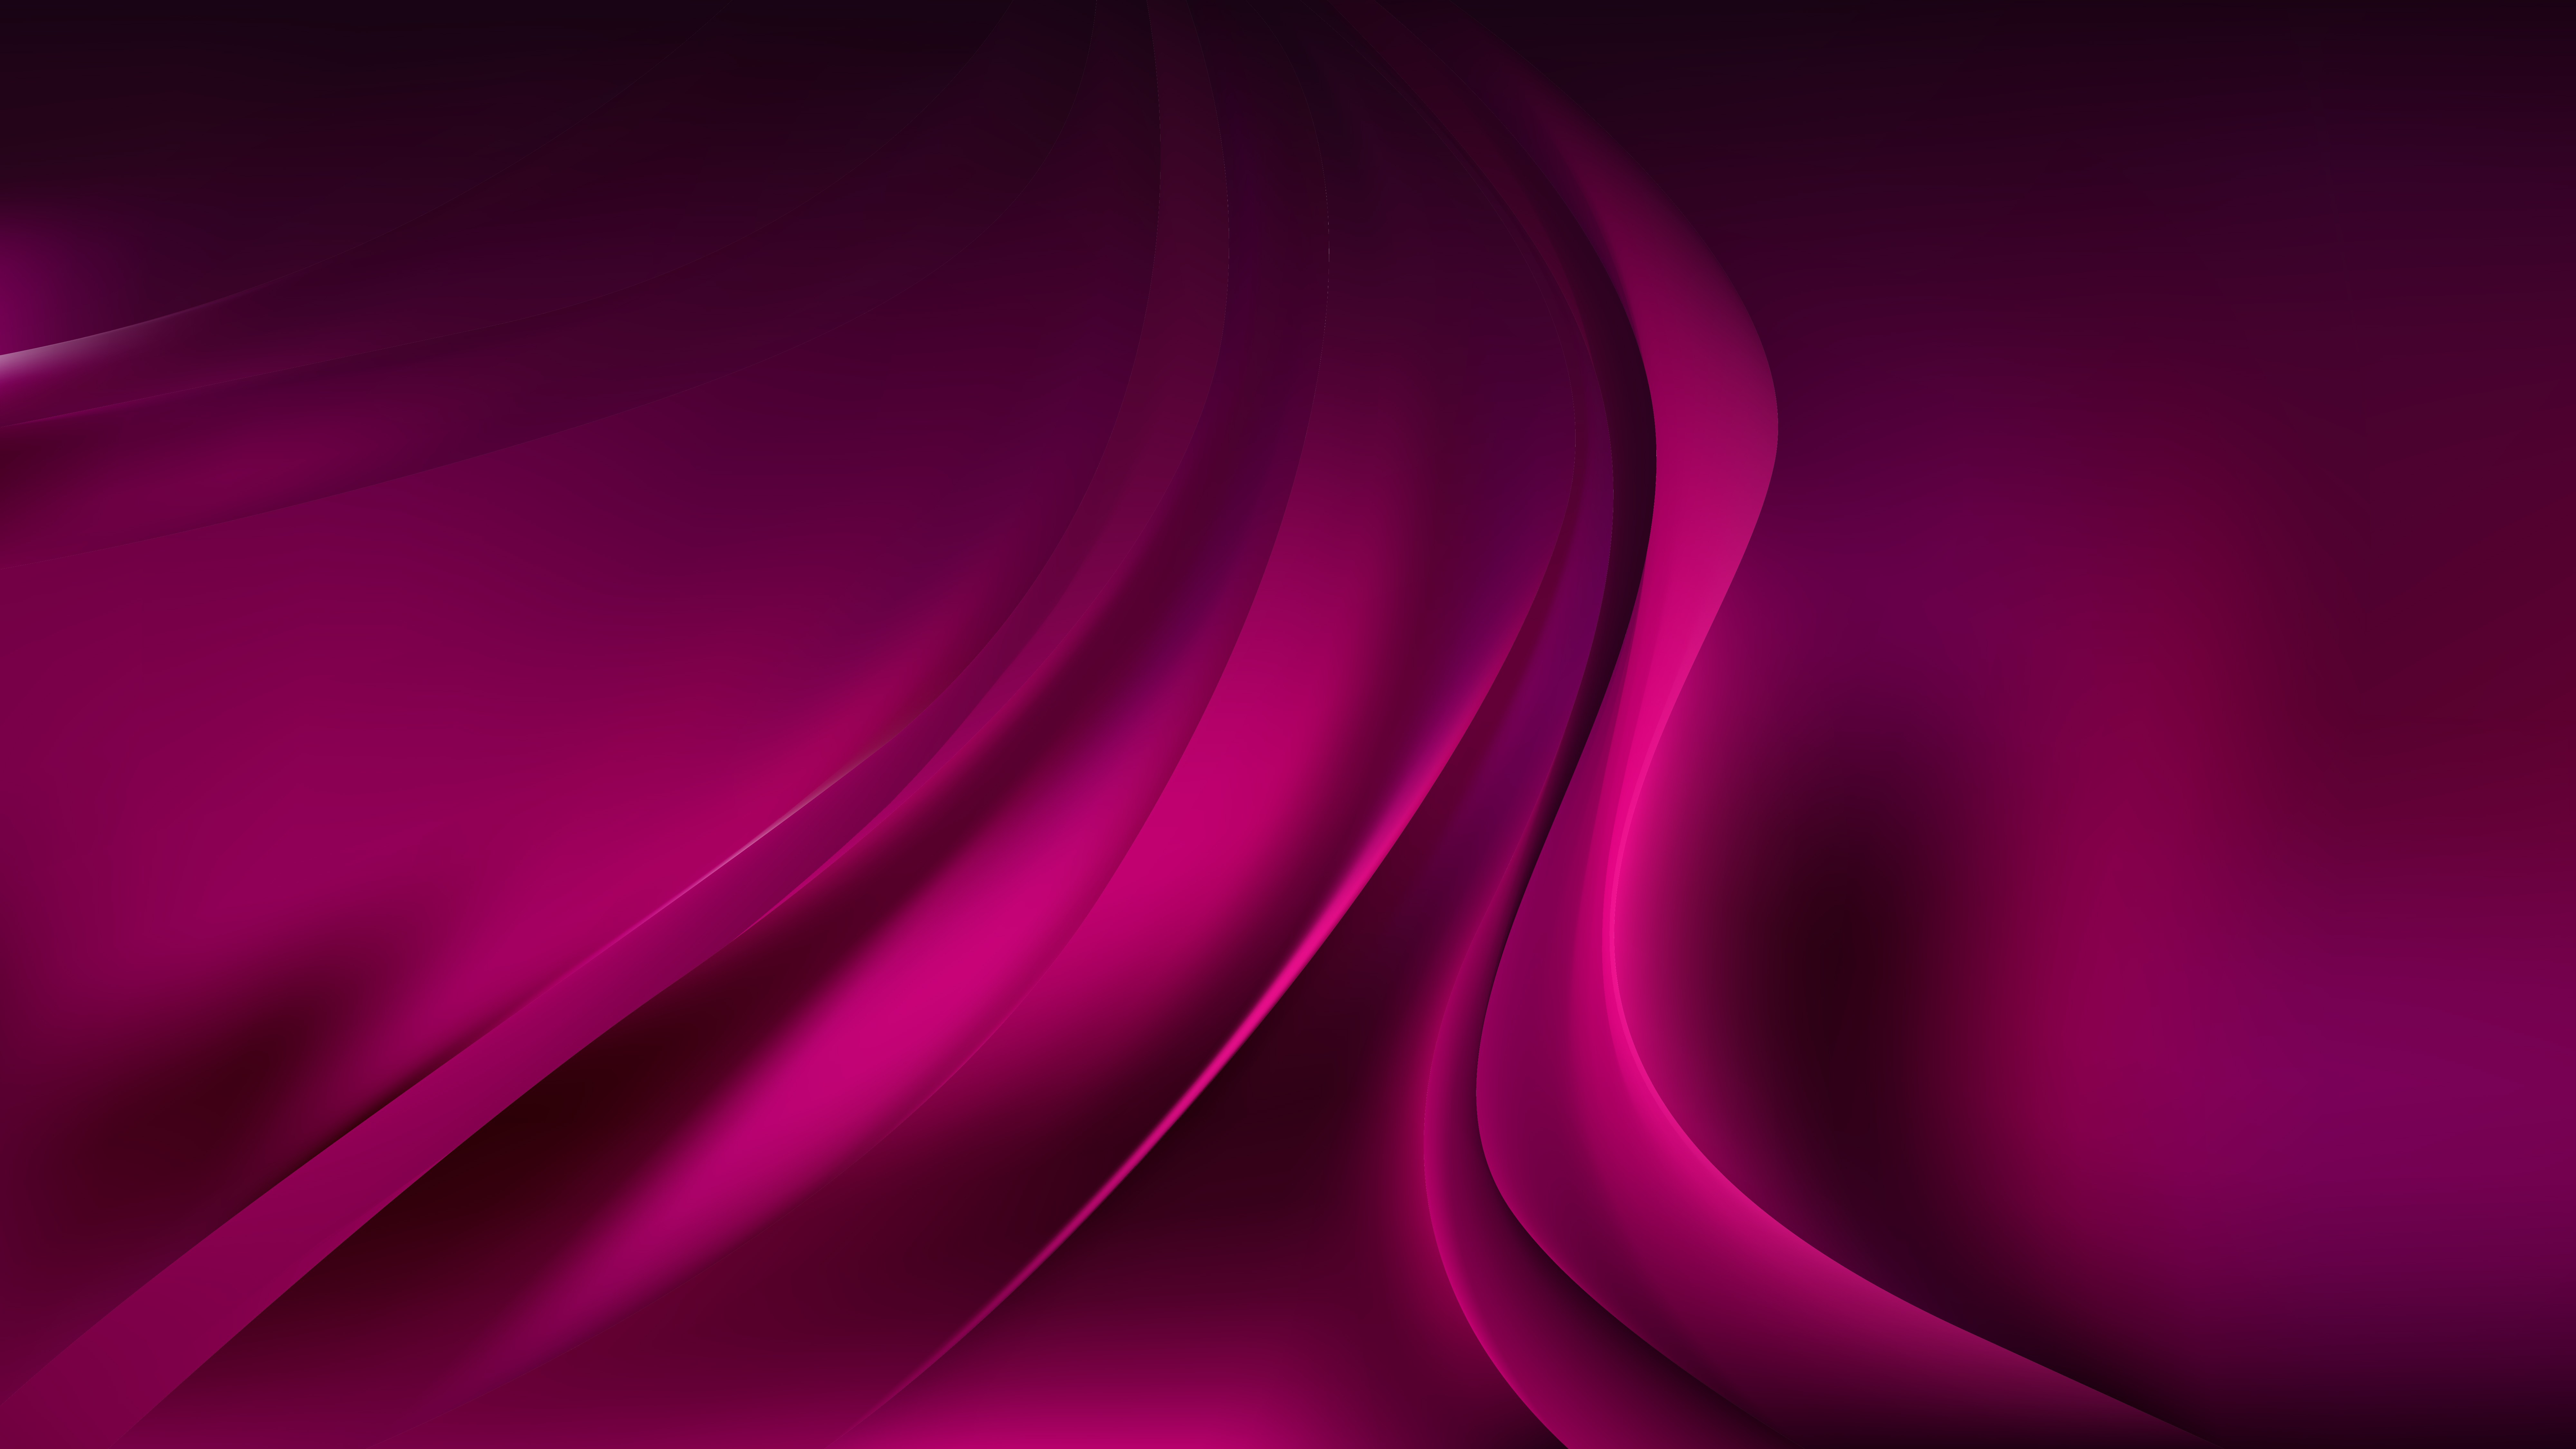 [30+] Cool Pink Abstract Backgrounds on WallpaperSafari